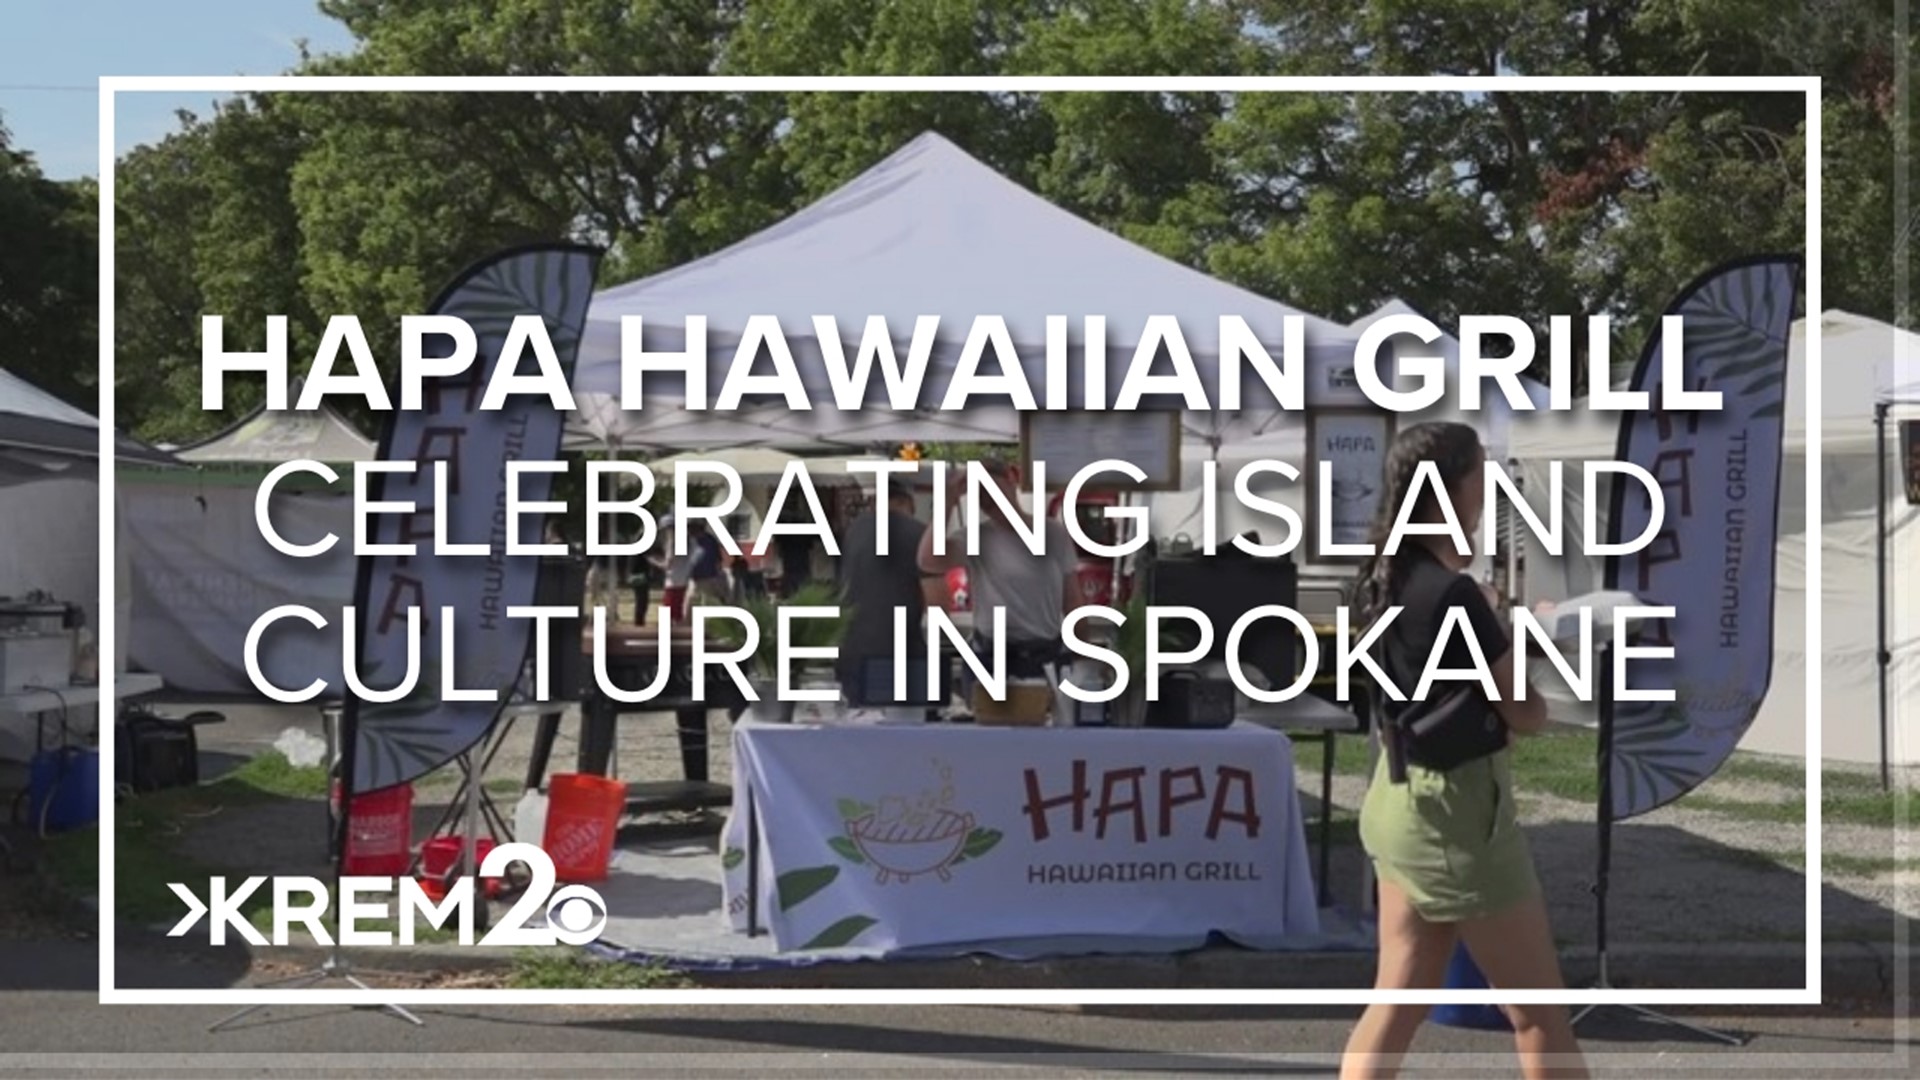 You can find Hapa Hawaiian Grill and the Perry Street and Fairwood Farmers Markets.